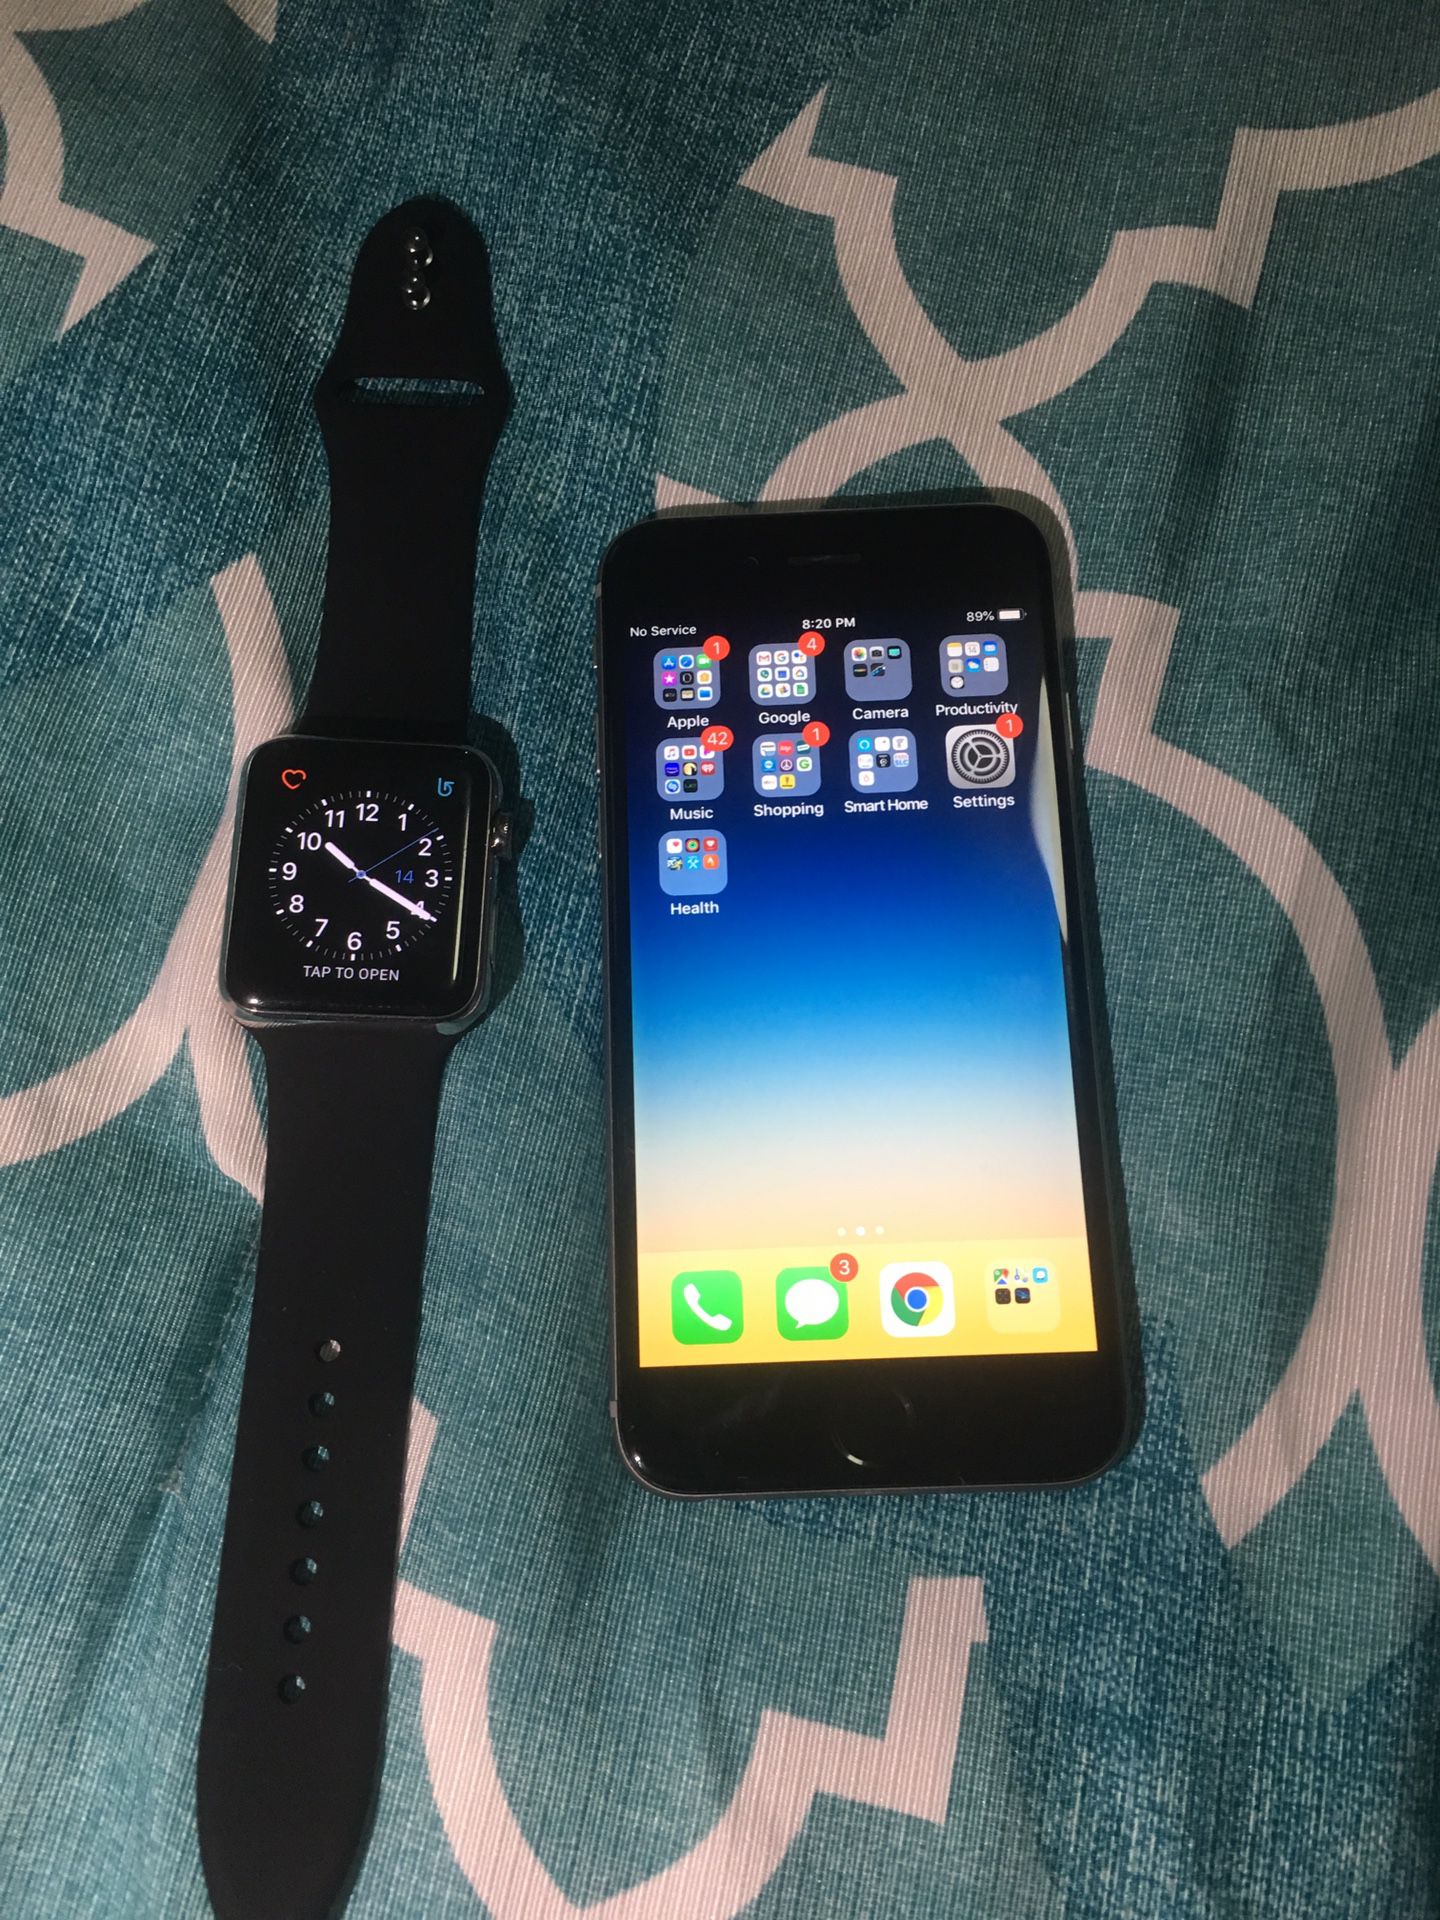 Apple iPhone 6 and Apple Watch